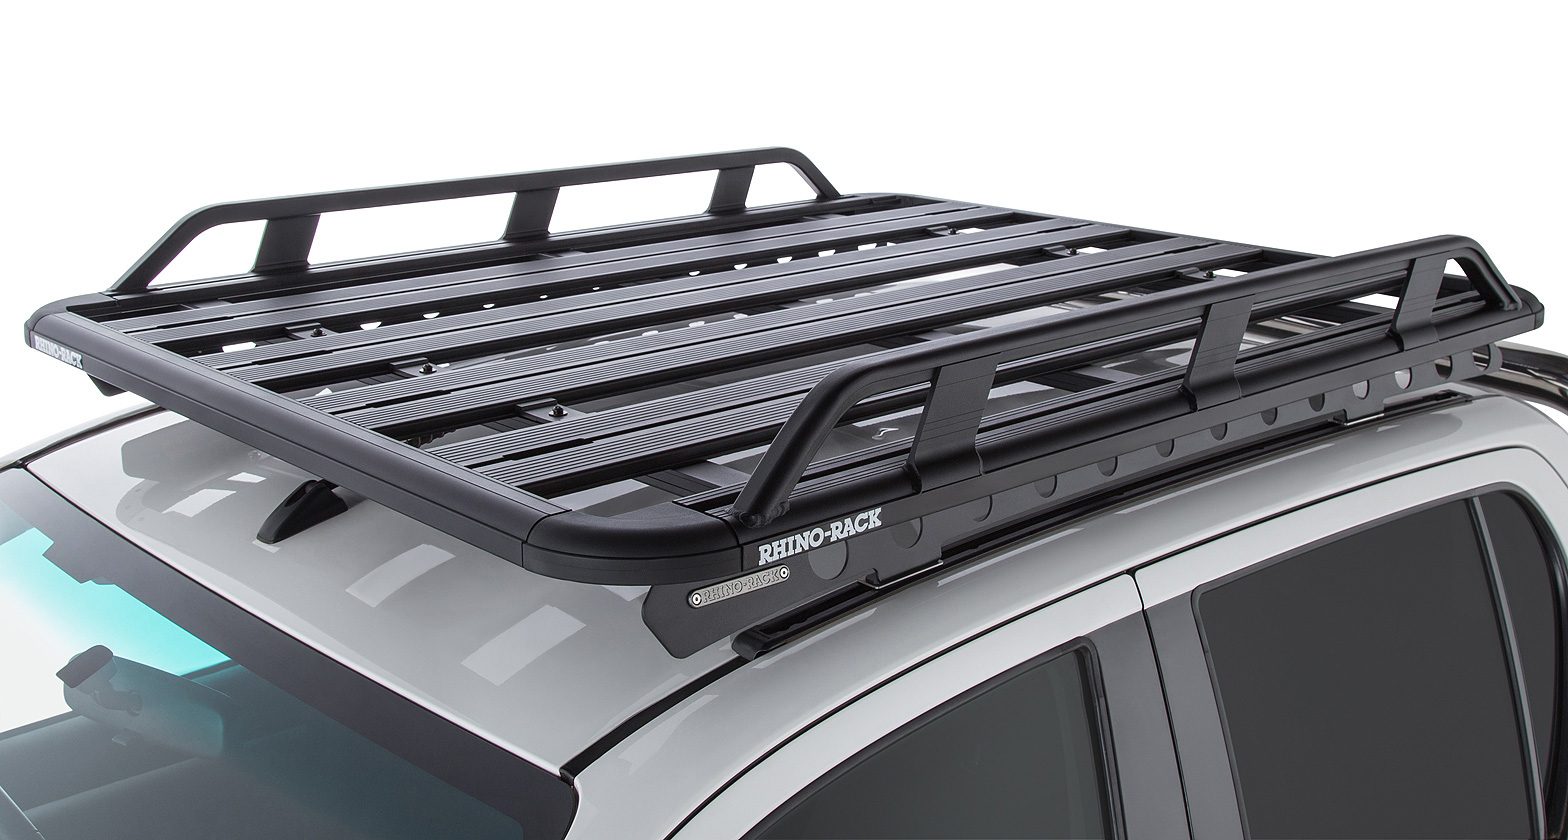 Rhino Rack JC-00302 Pioneer Tradie (1528mm x 1236mm) with Backbone for Toyota Hilux N80 4dr Ute with Bare Roof (2015 onwards) - Track Mount